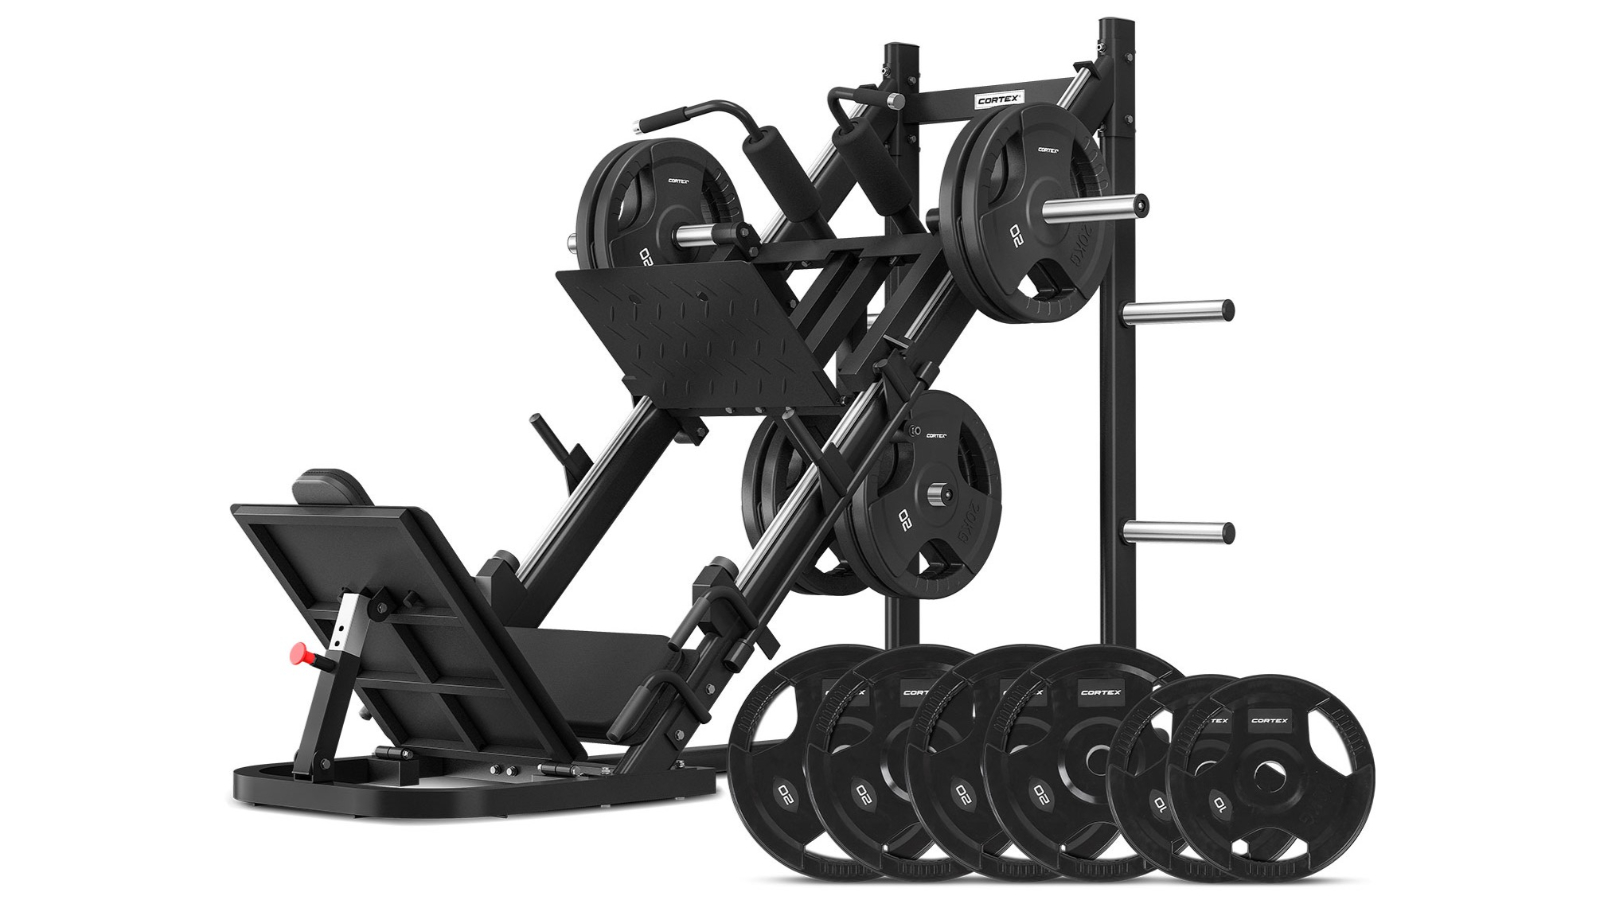 LSG SSN-105 Single Gym Station with 73kg Weight Stack – LSG Fitness